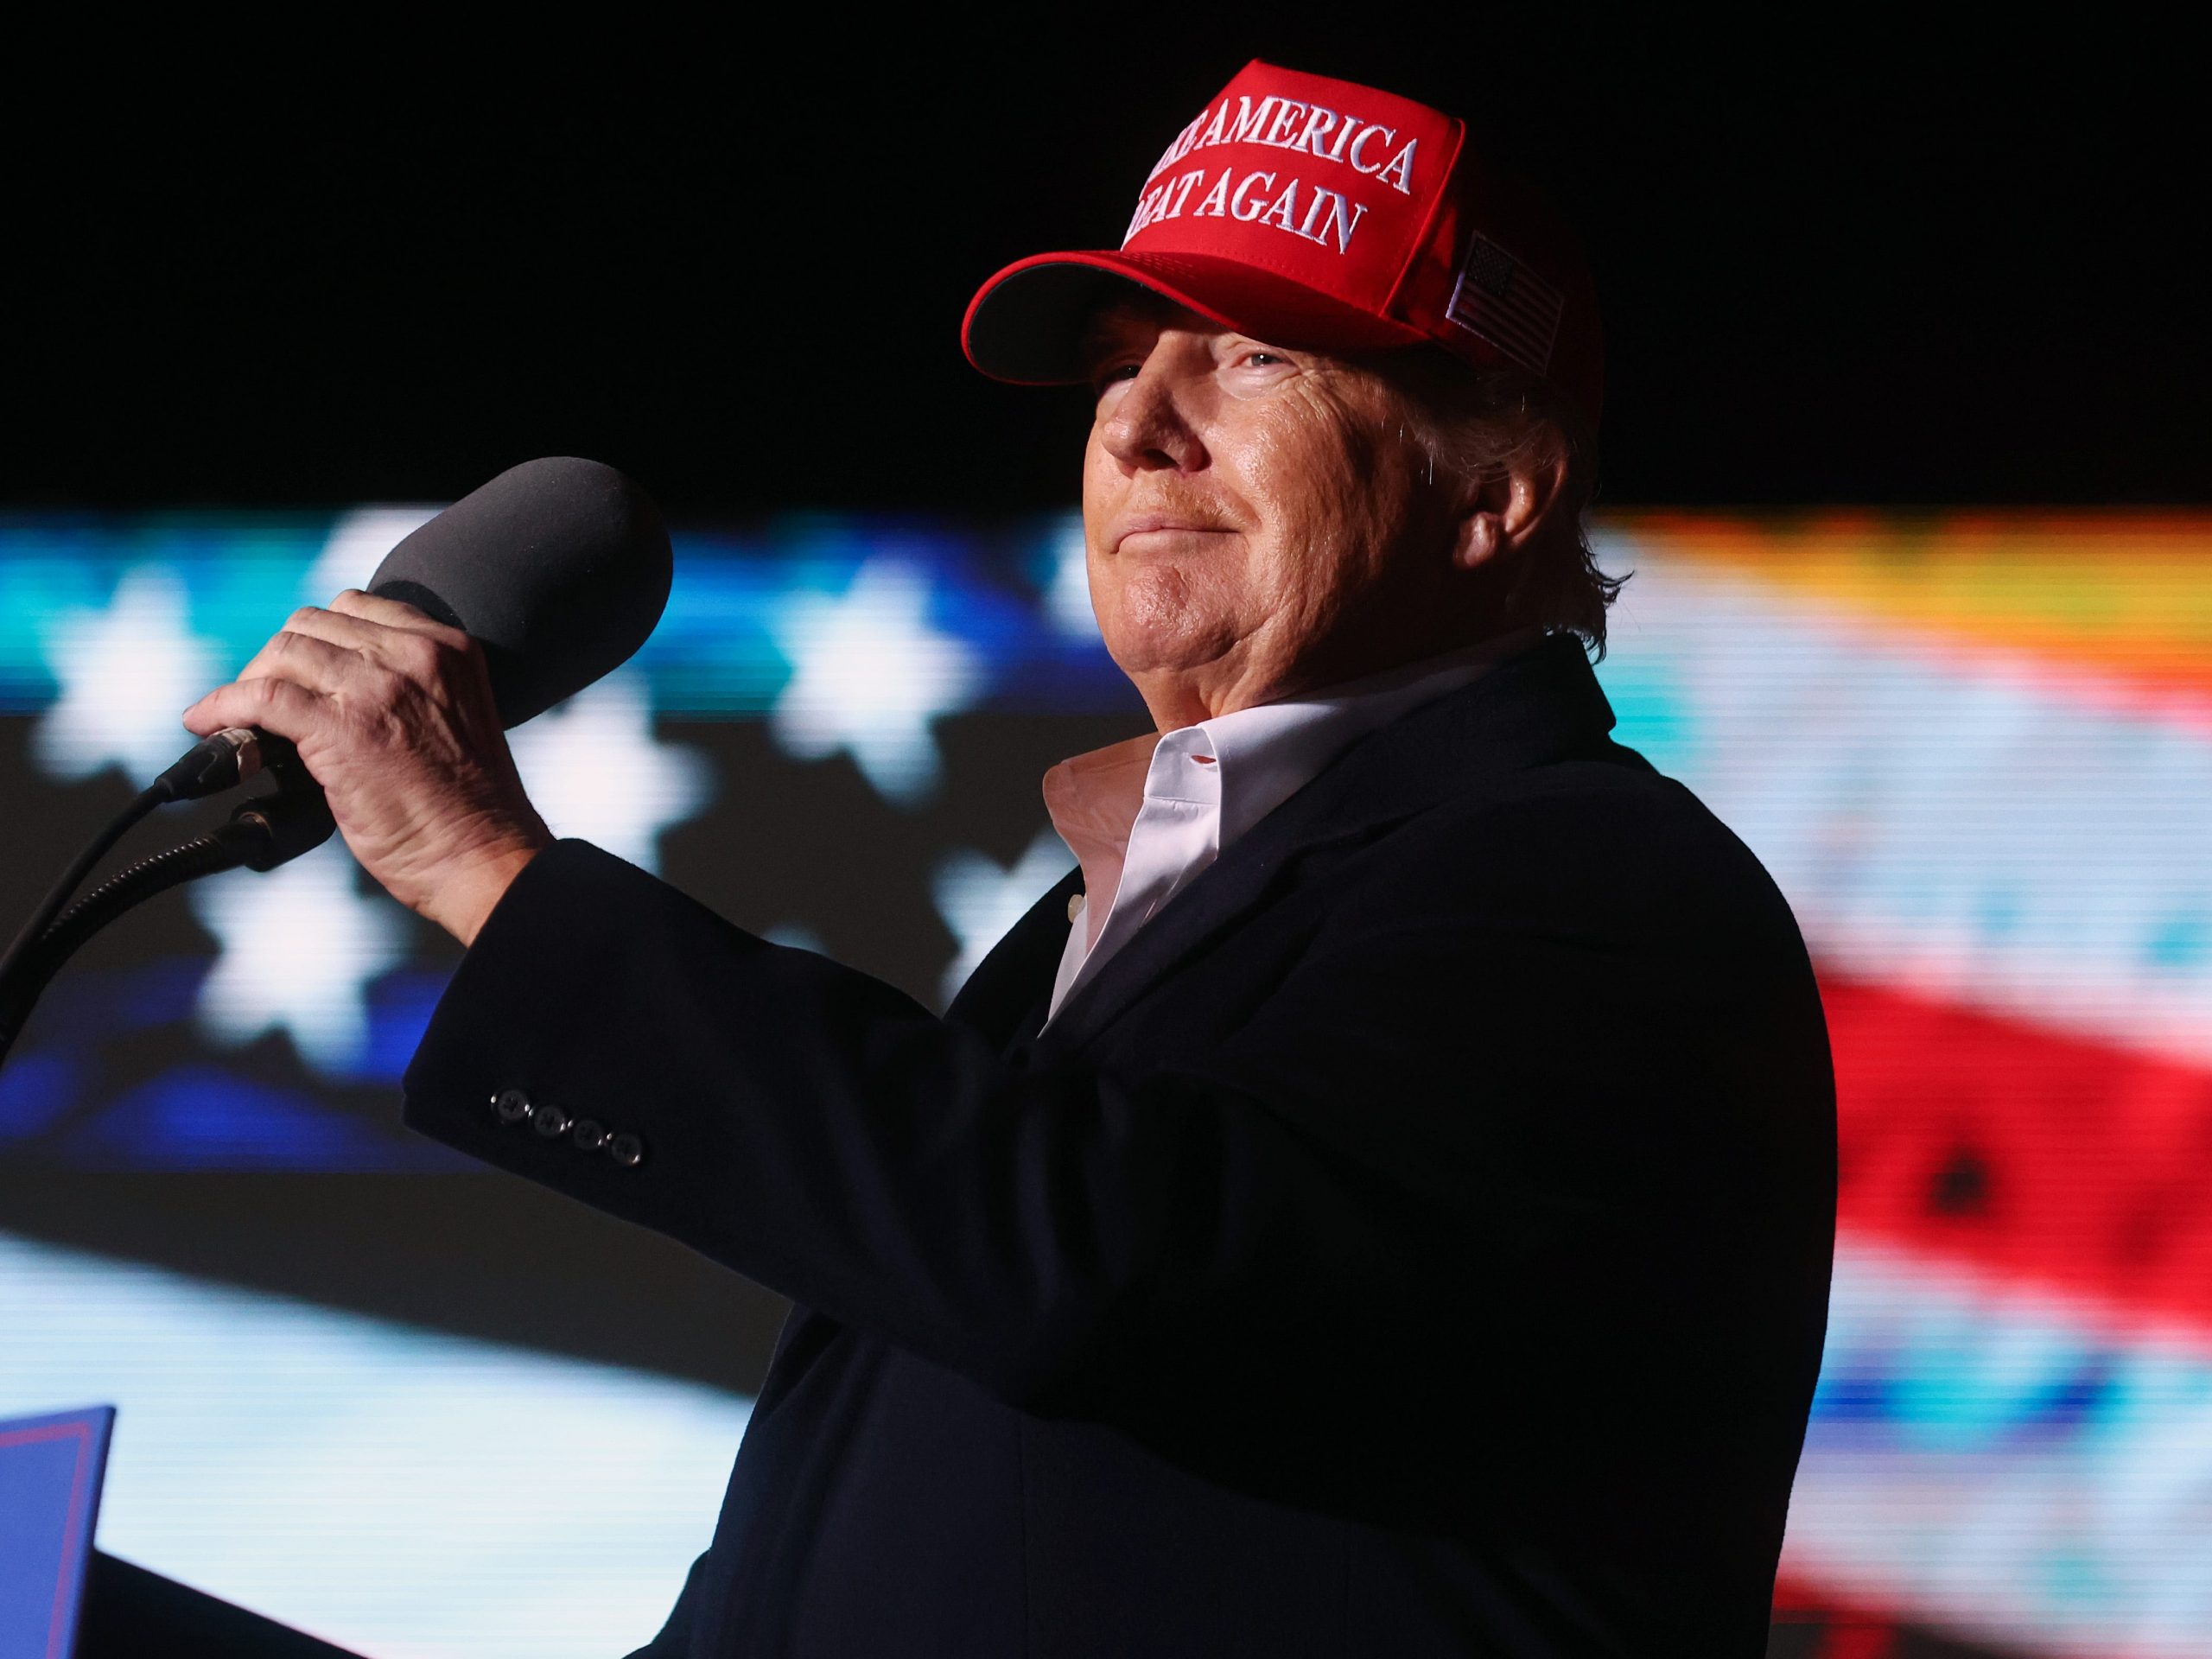 Former President Donald Trump prepares to speak at a rally at the Canyon Moon Ranch festival grounds on January 15, 2022 in Florence, Arizona.